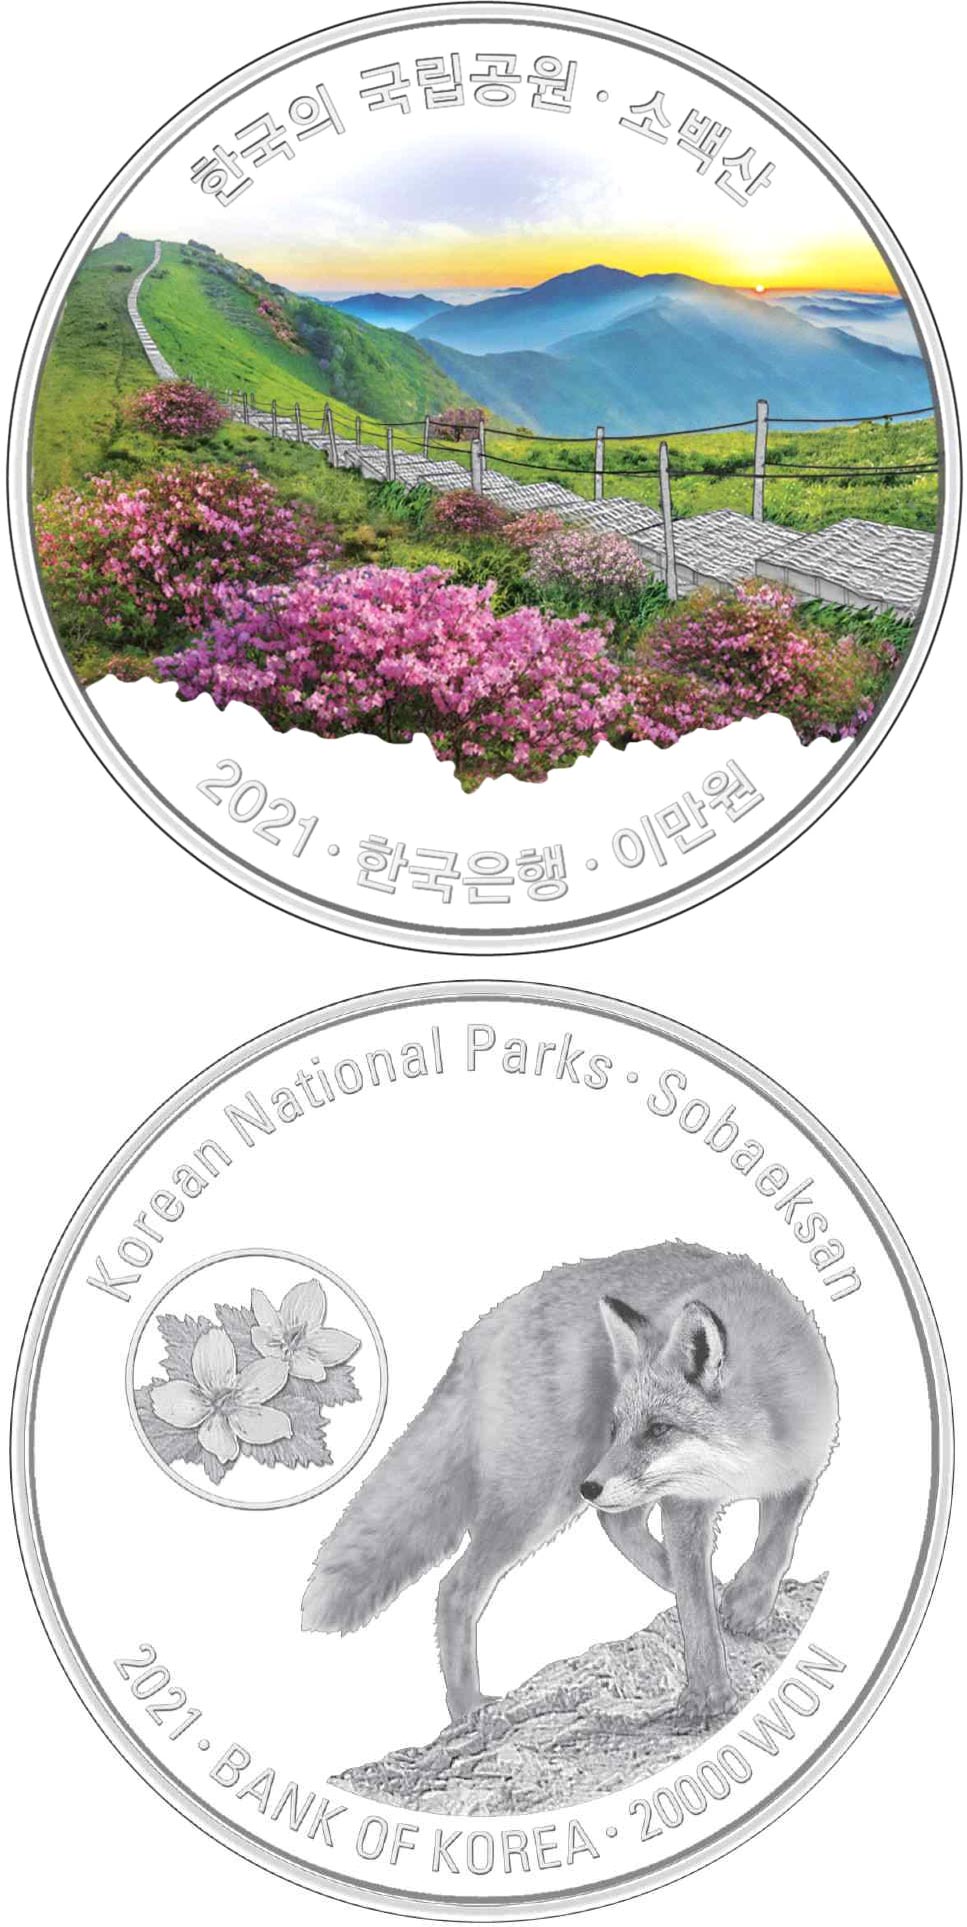 Image of 20000 won coin - Sobaeksan | South Korea 2021.  The Copper–Nickel (CuNi) coin is of Proof quality.